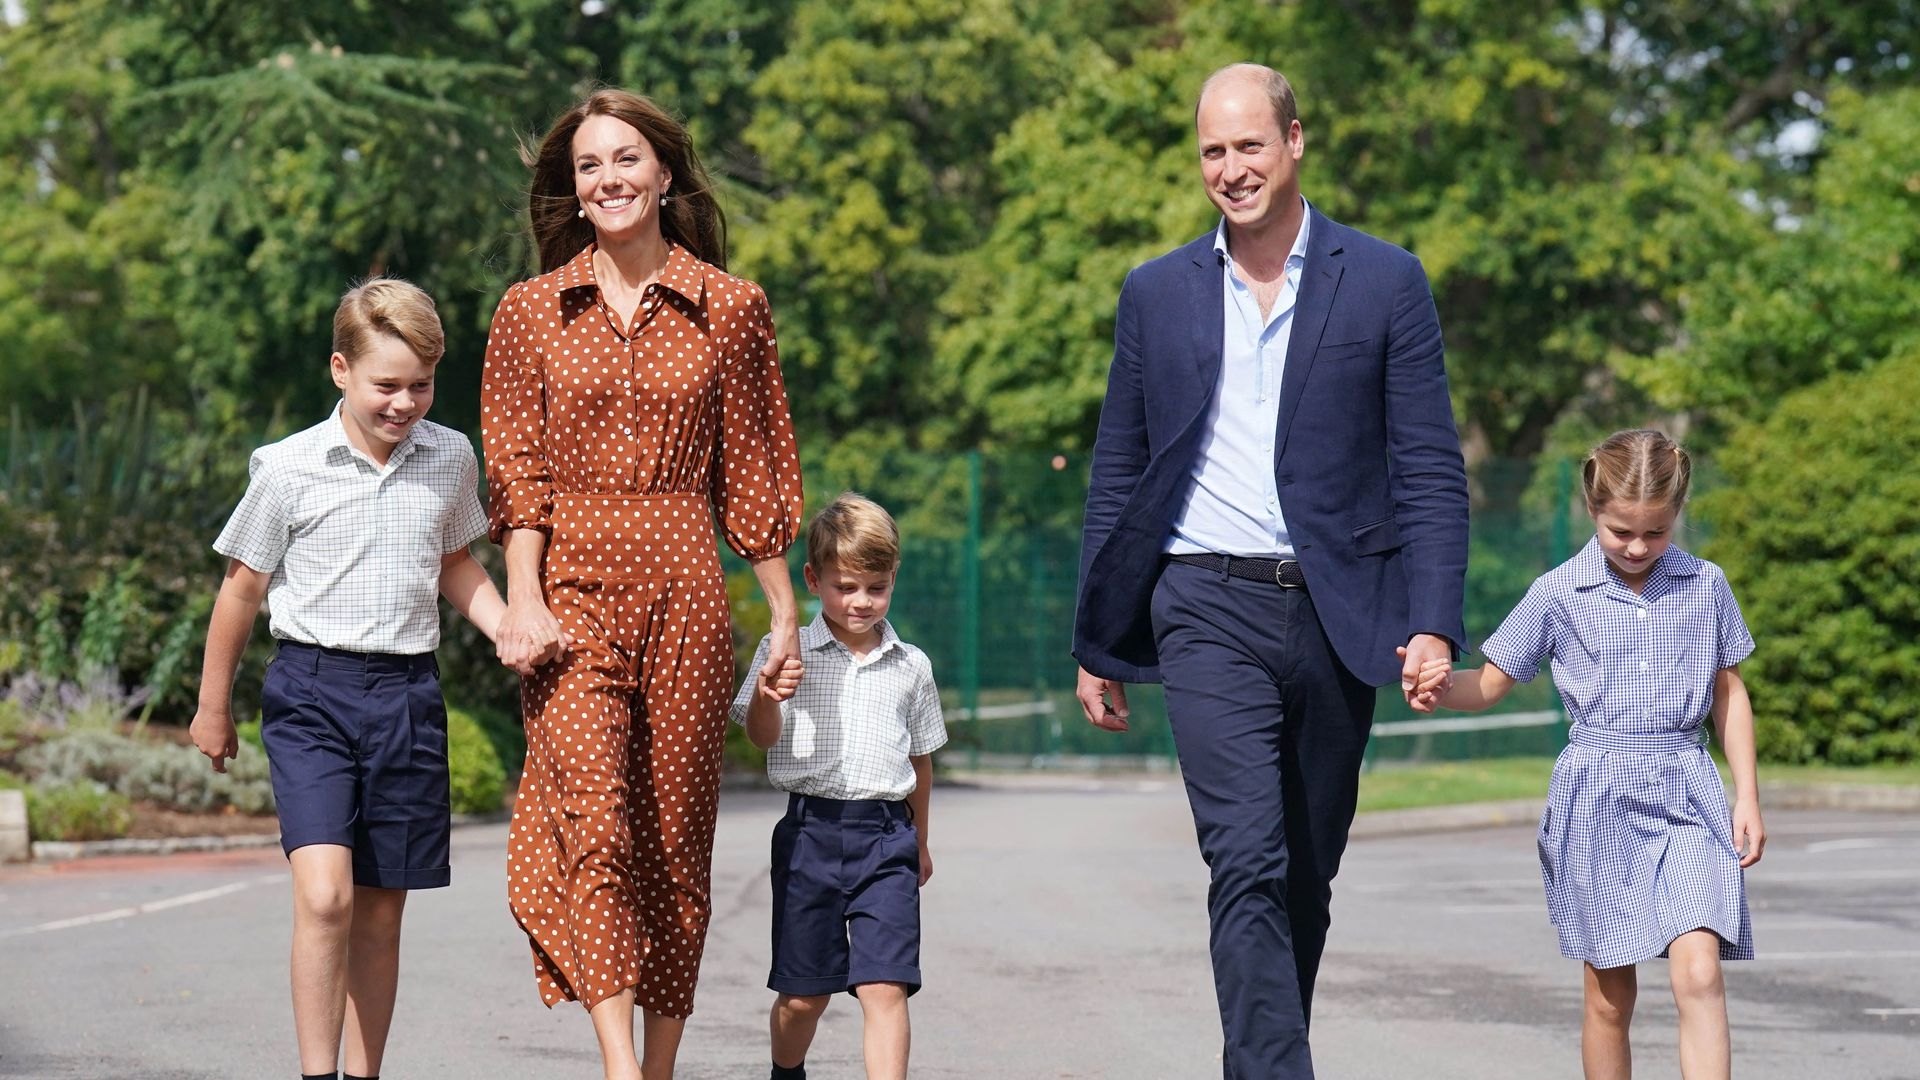 Princess Kate and her children's royal dress code for swimming at Buckingham Palace